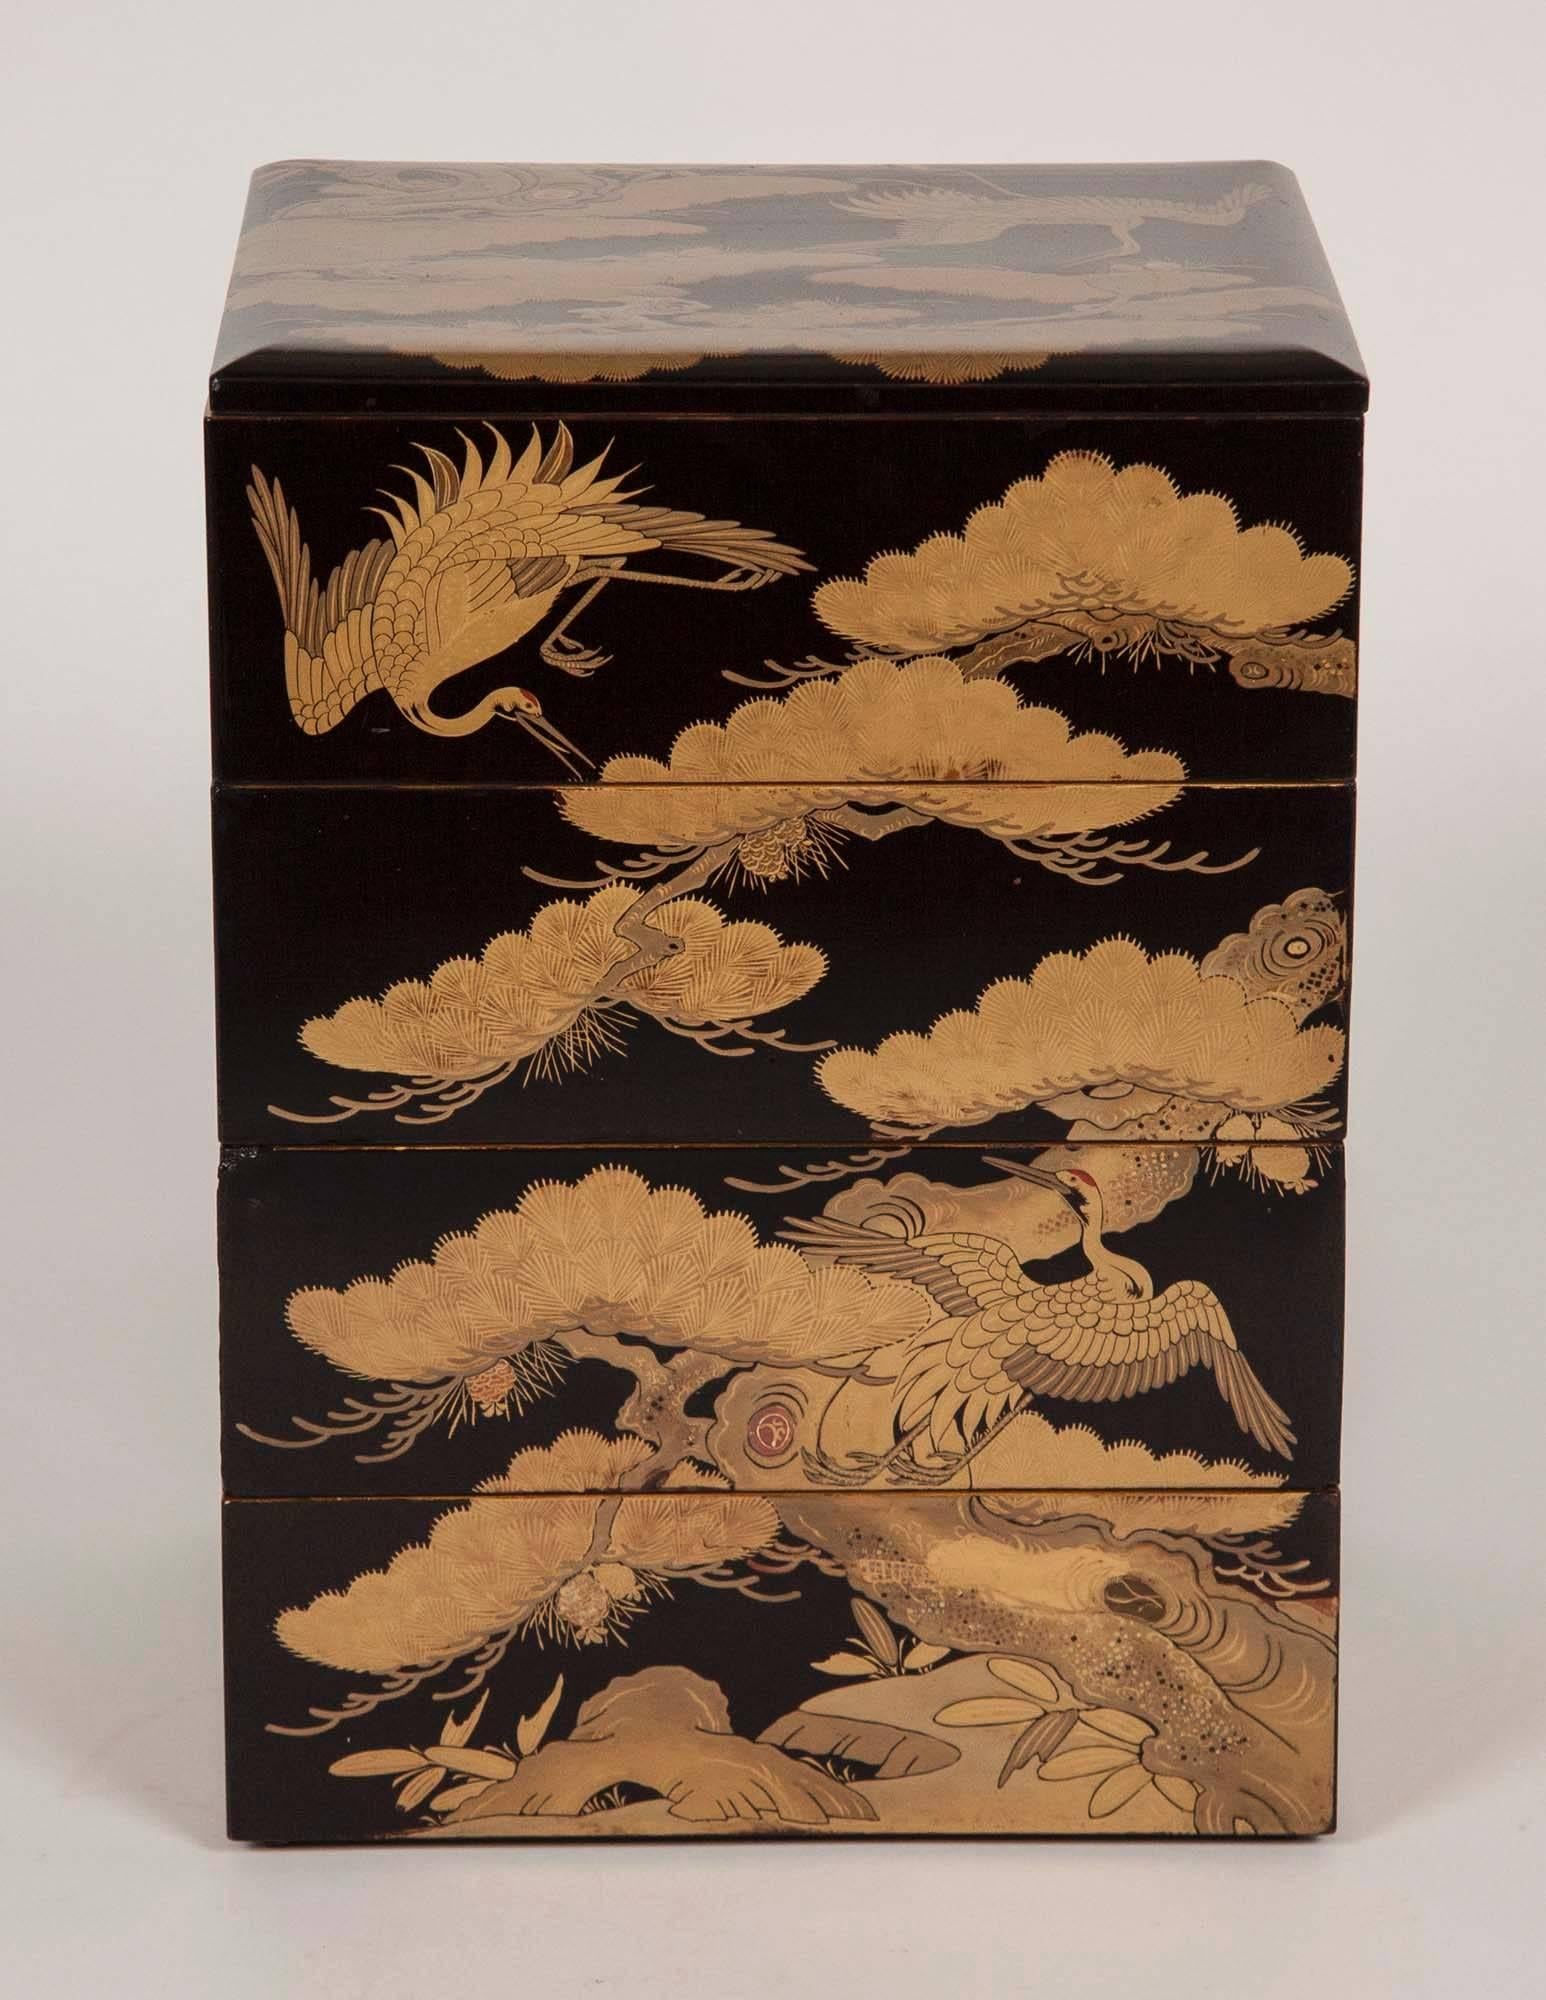 A four-tier Japanese Meiji period black lacquer Jubako box with stork and fir tree decoration. Box in four sections with lid.